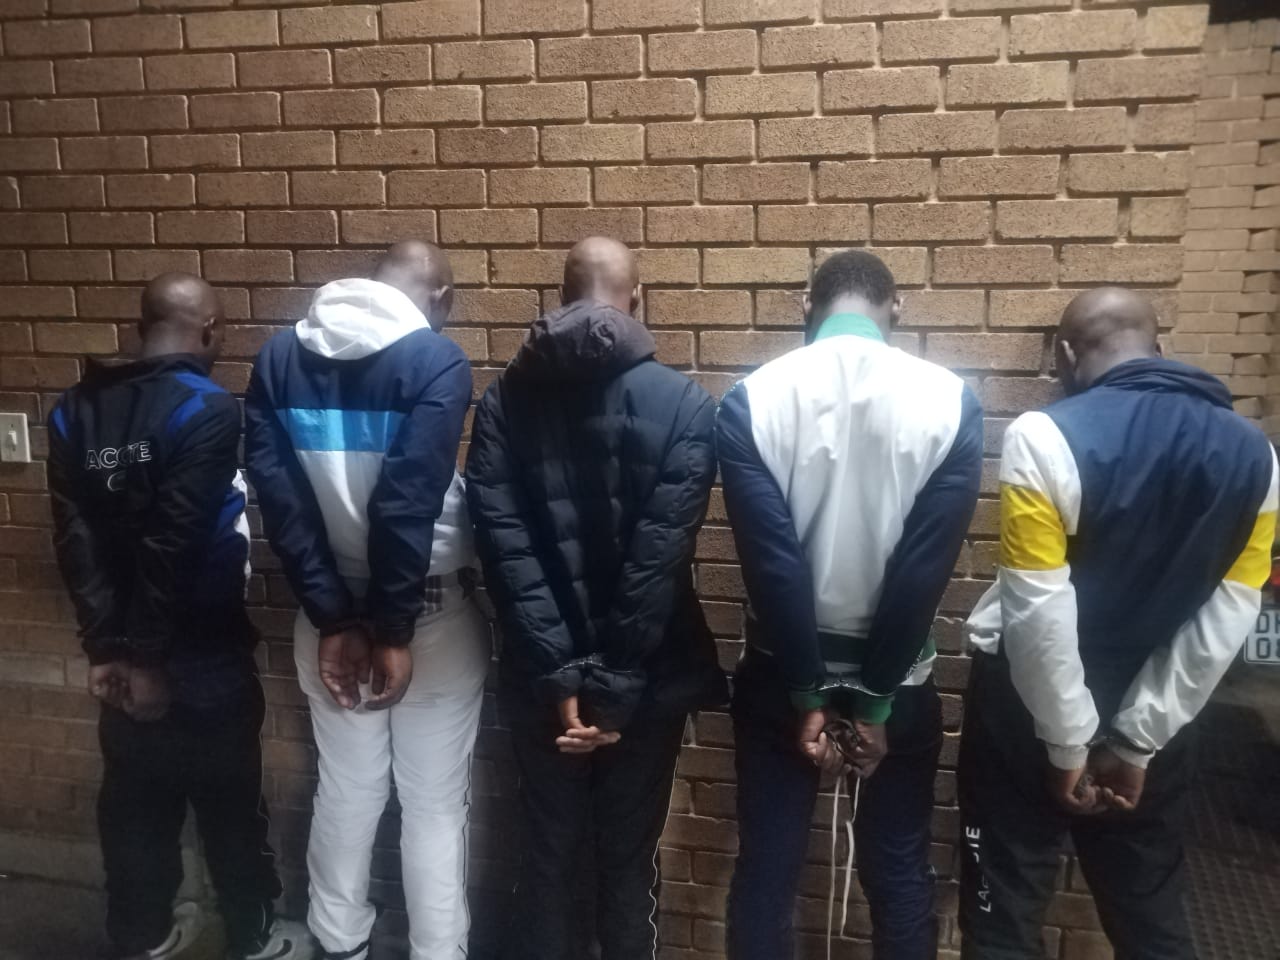 Police make a remarkable breakthrough in arresting five suspects who allegedly committed business robbery at jewellery store in Savanna Mall